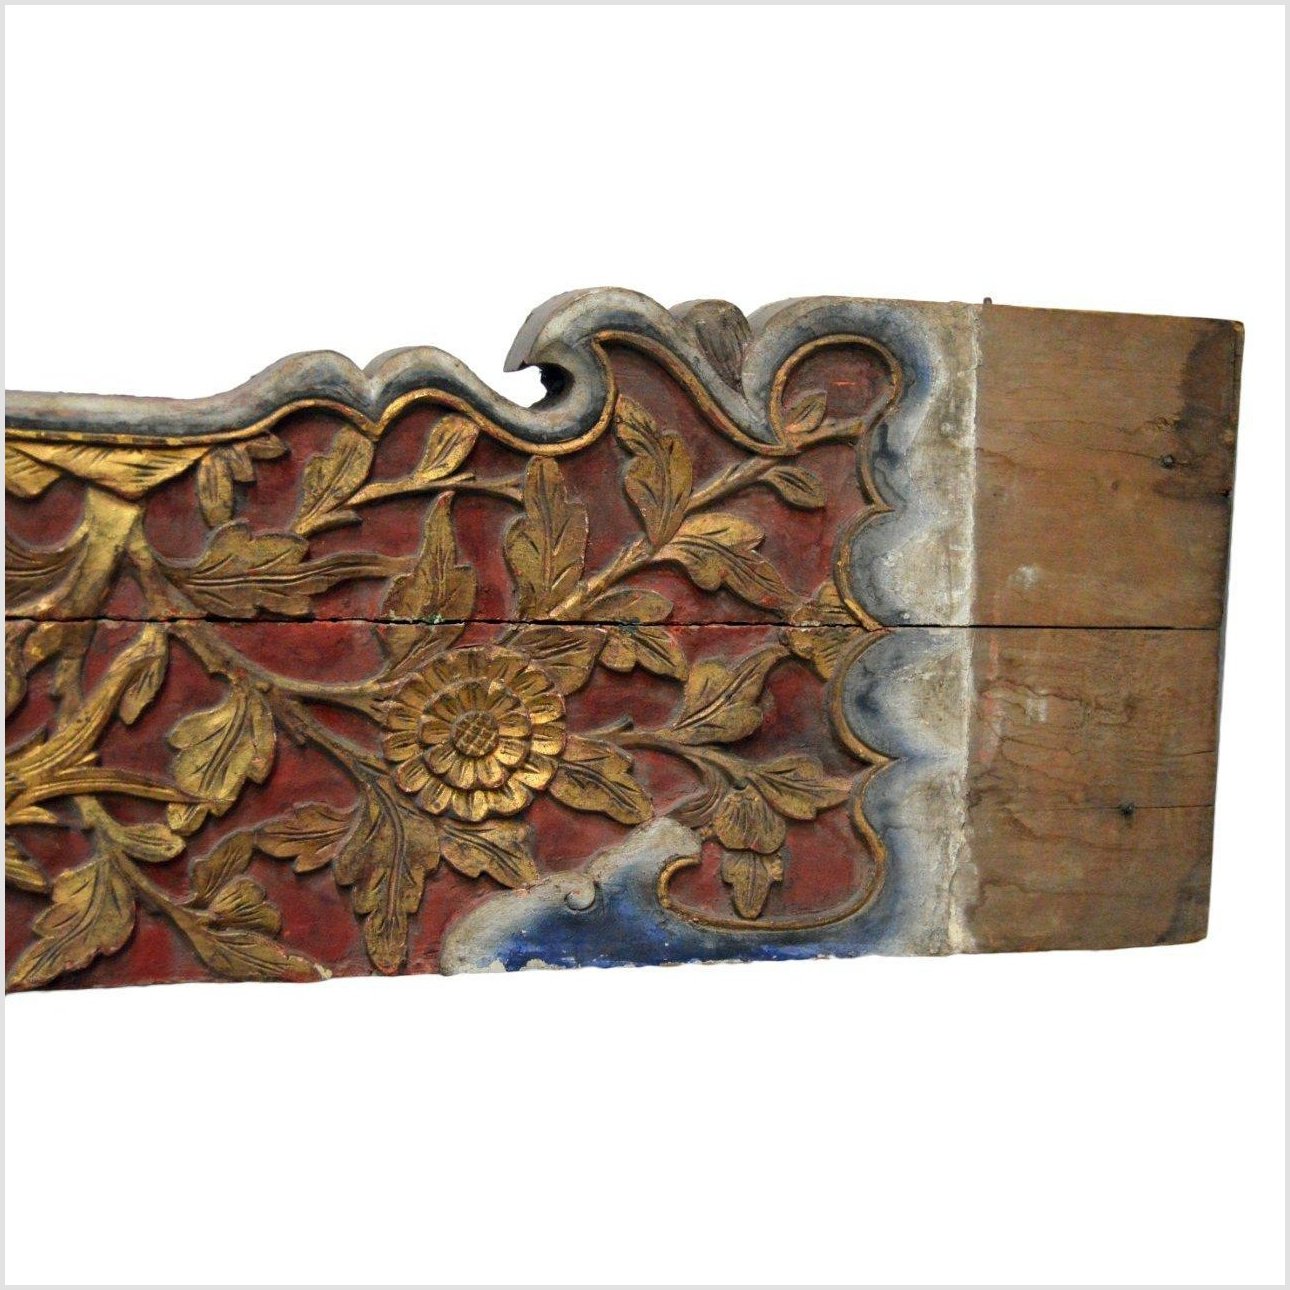 Antique Hand-Carved Wall Ornament-YN2989-4. Asian & Chinese Furniture, Art, Antiques, Vintage Home Décor for sale at FEA Home